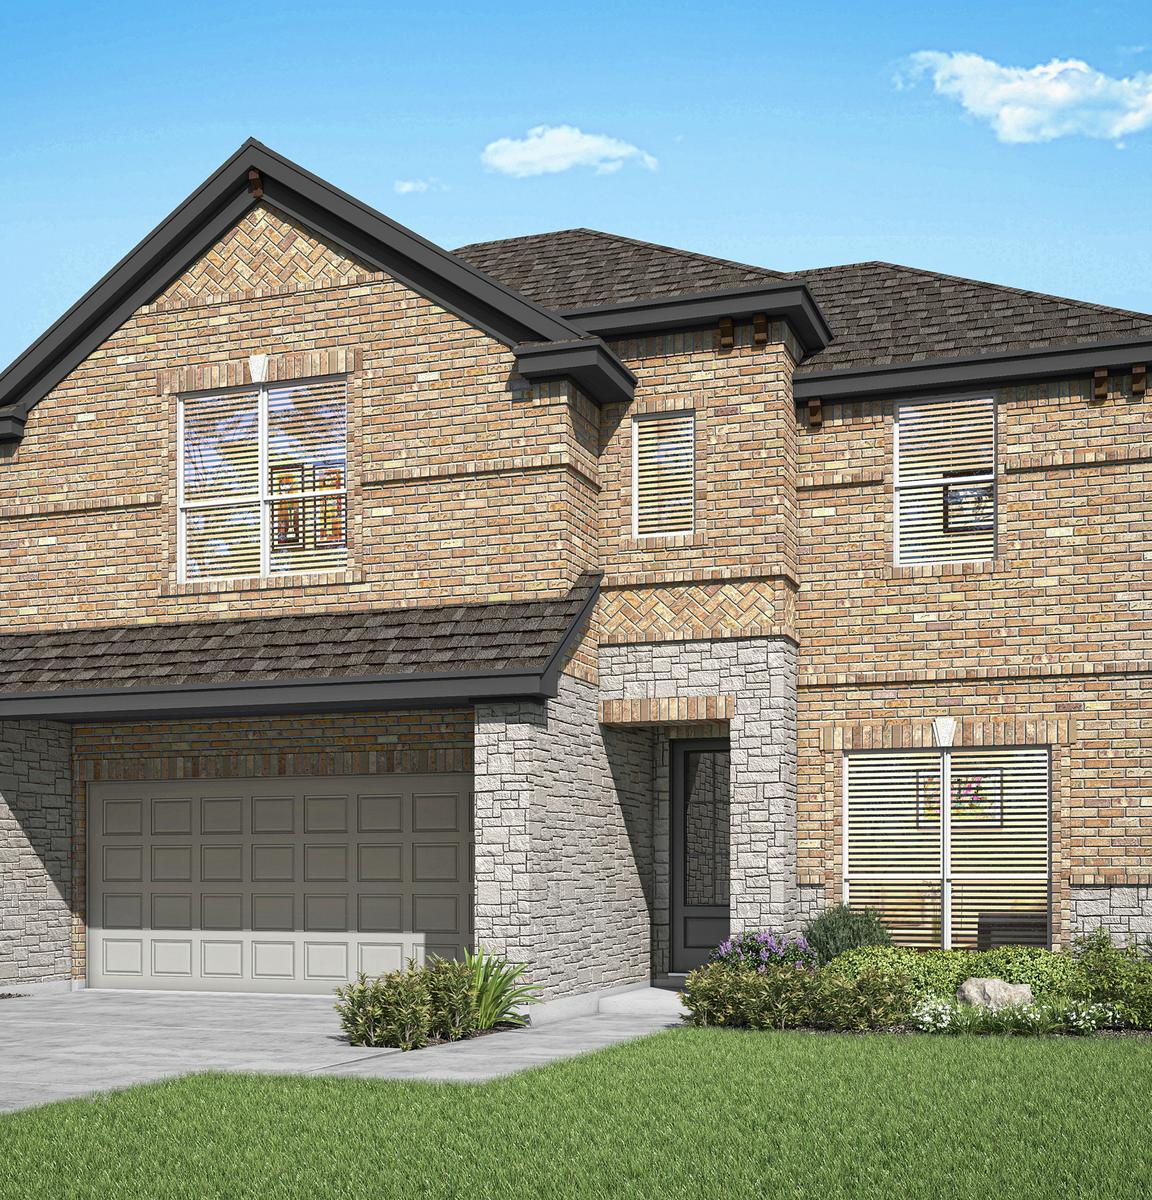 The Stevenson plan is a two-story home with a brick and stone exterior.